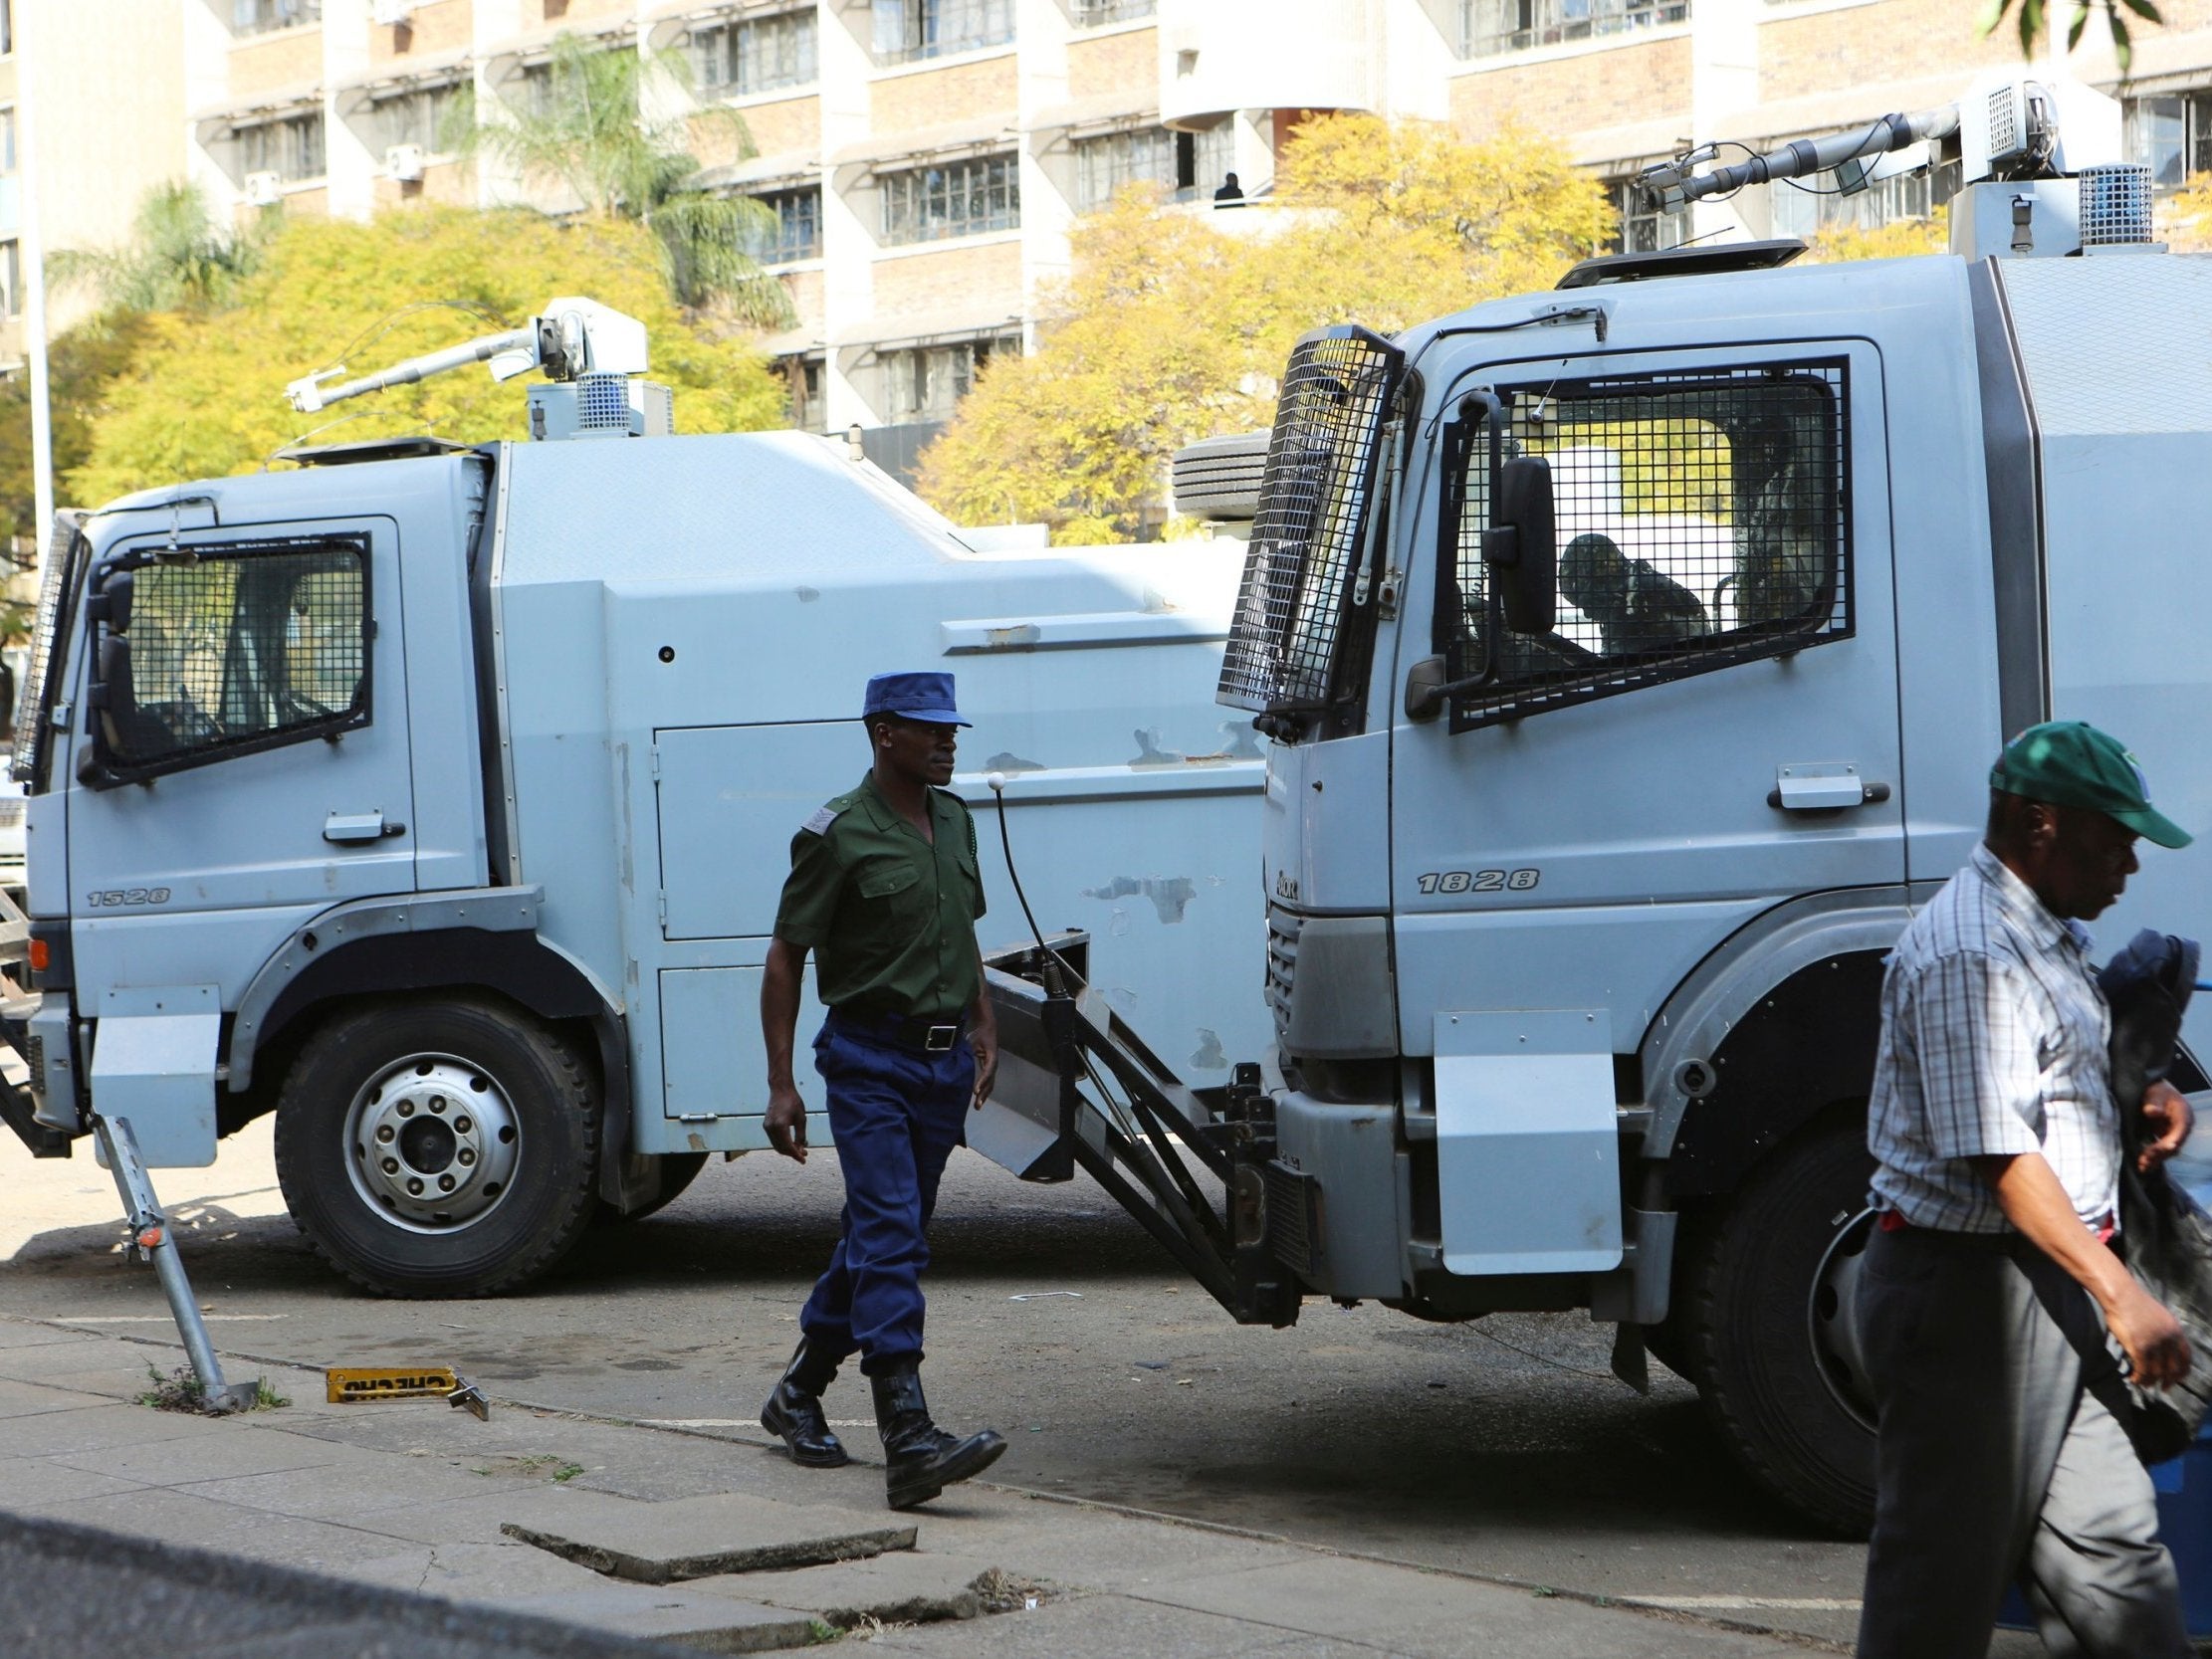 Police water cannons are seen in the capital, Harare, Zimbabwe where tensions are high following the general election.